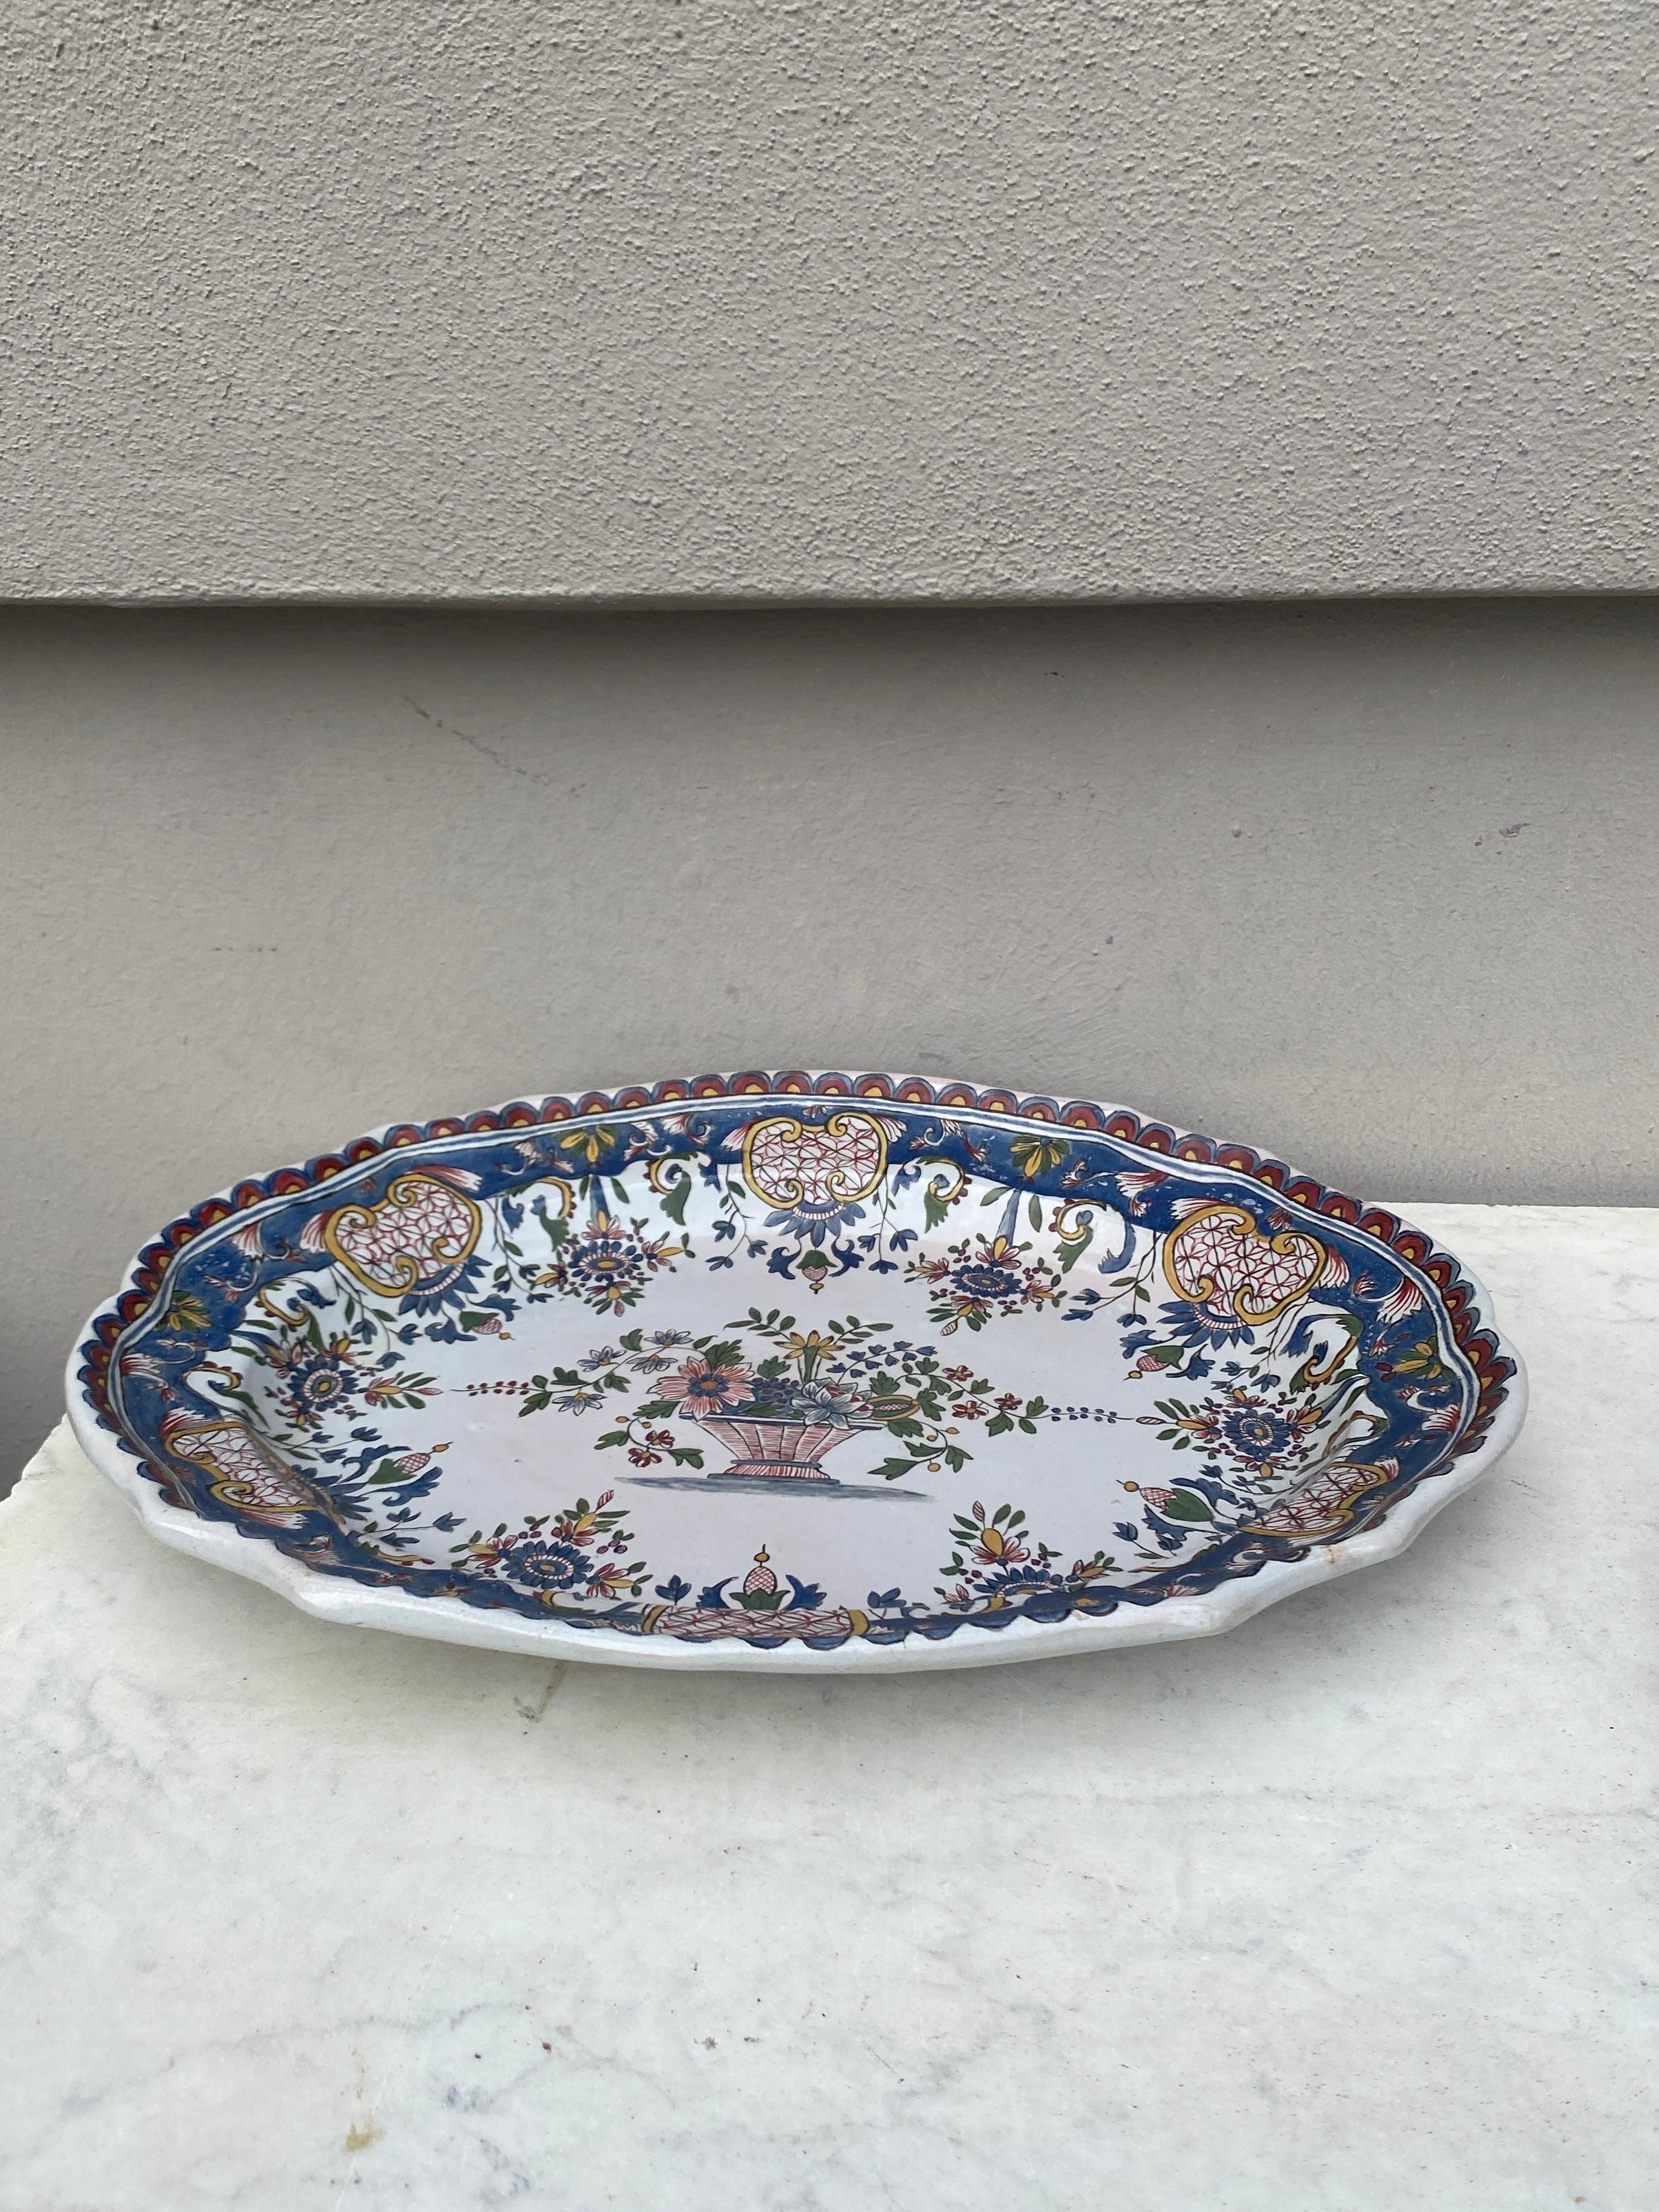 Large French Faience Platter Circa 1950.